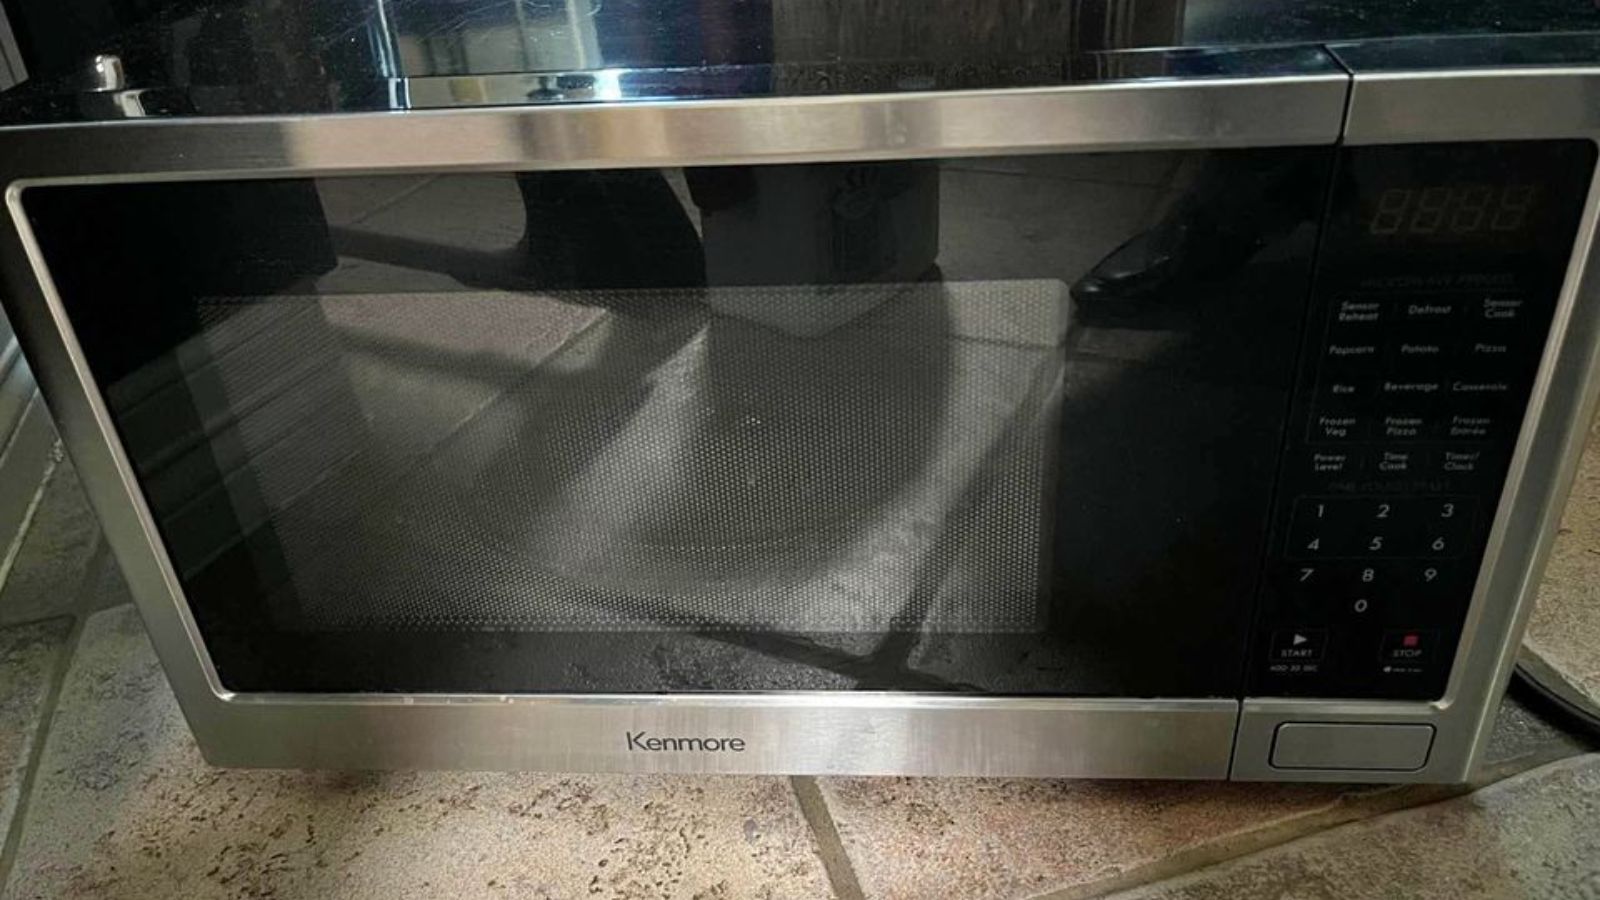 Kenmore microwave lasting a long time - familyguidecentral.com